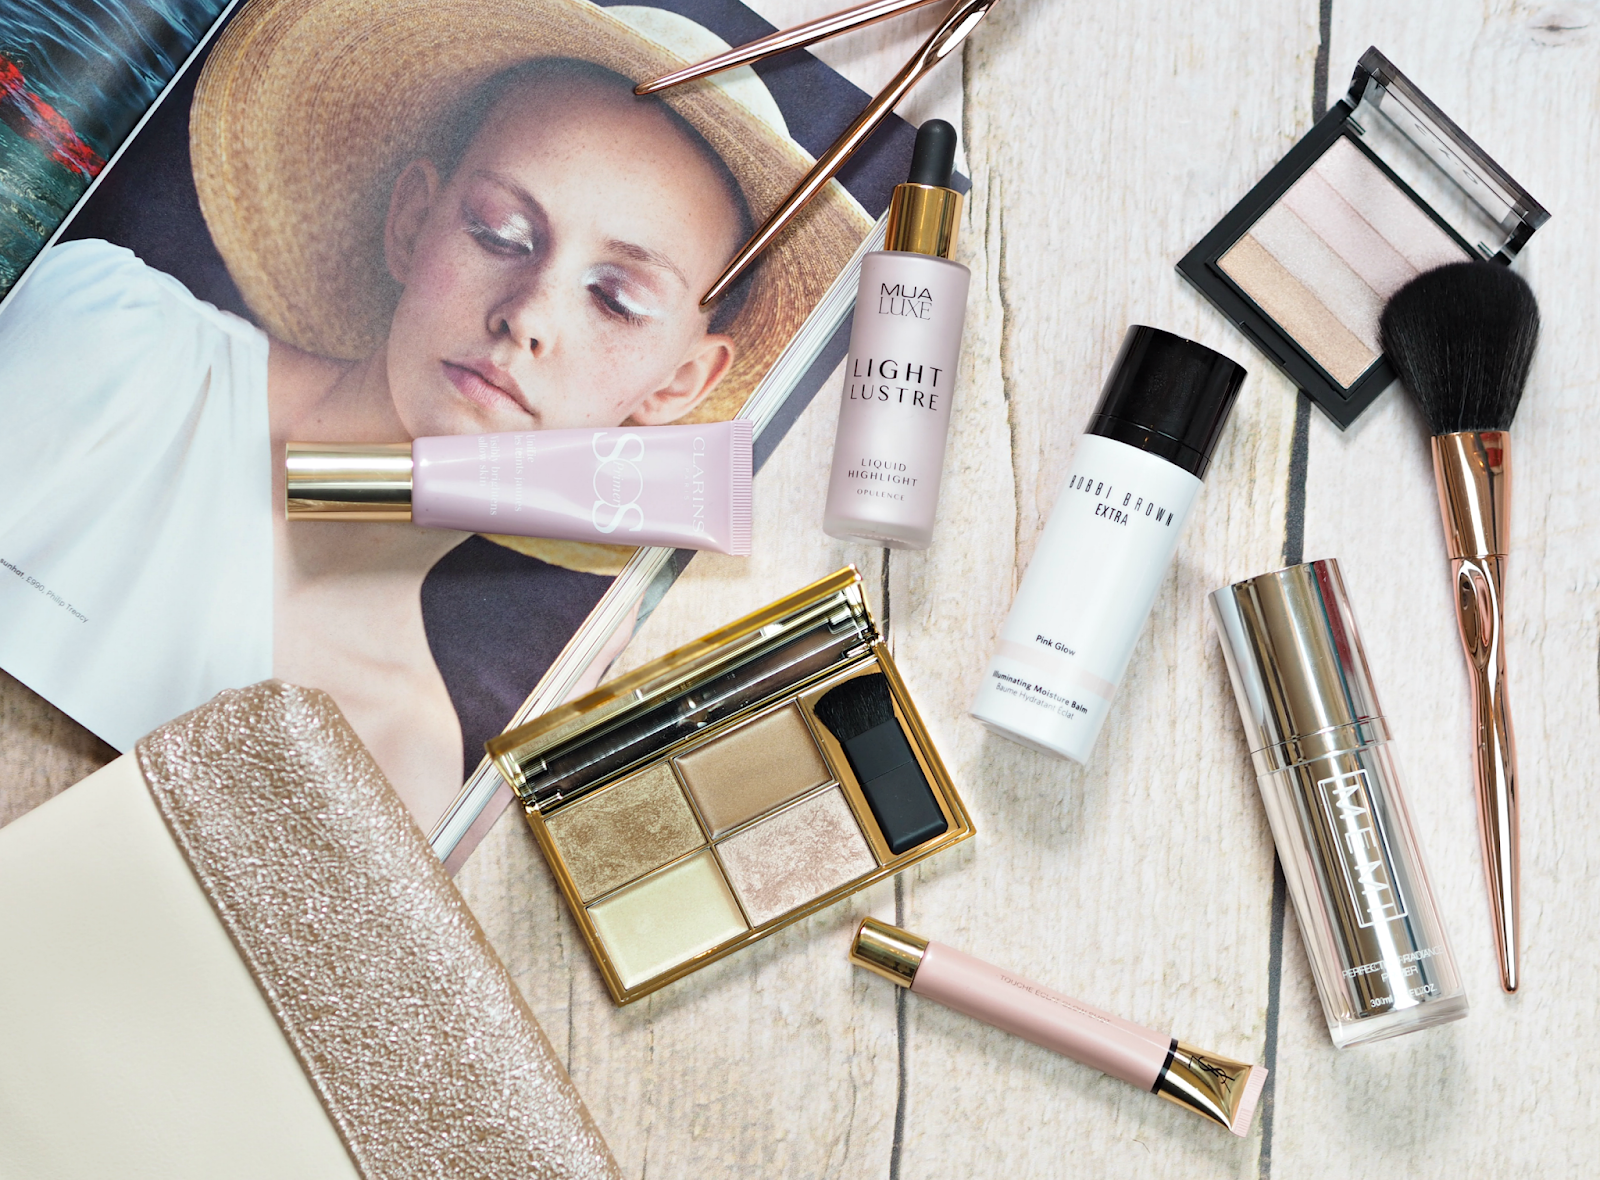 Fab Makeup & Highlighters To Achieve An Instagrammable Glow - No Matter Your Budget